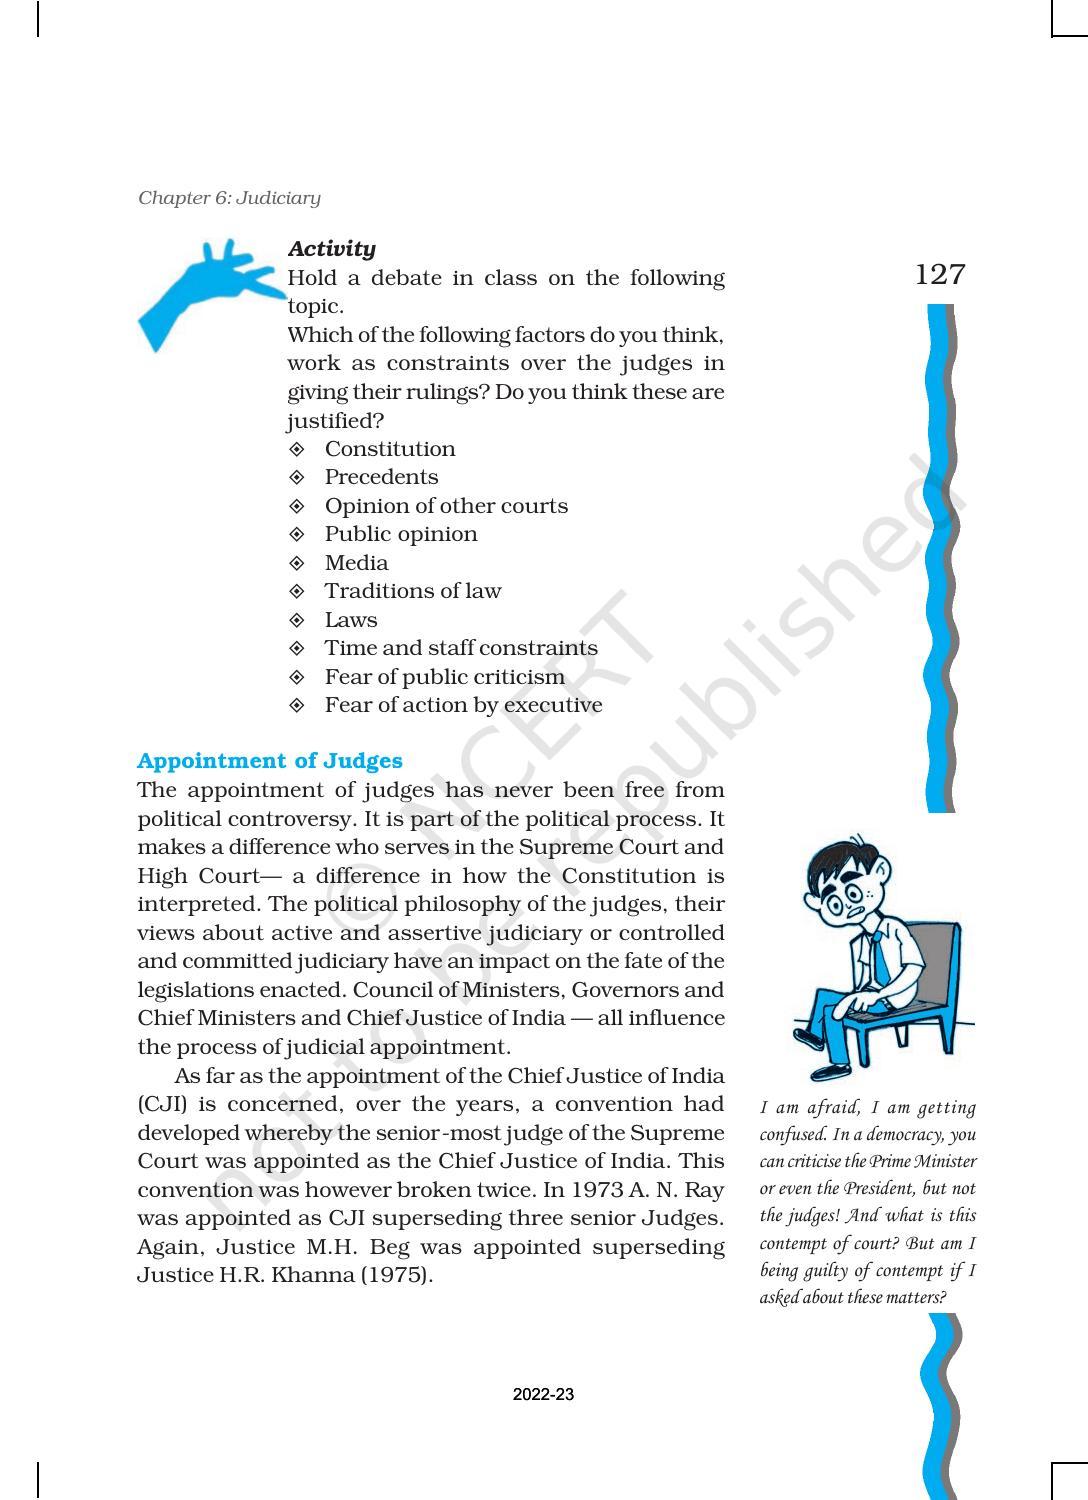 NCERT Book for Class 11 Political Science (Indian Constitution at Work) Chapter 6 Judiciary - Page 4